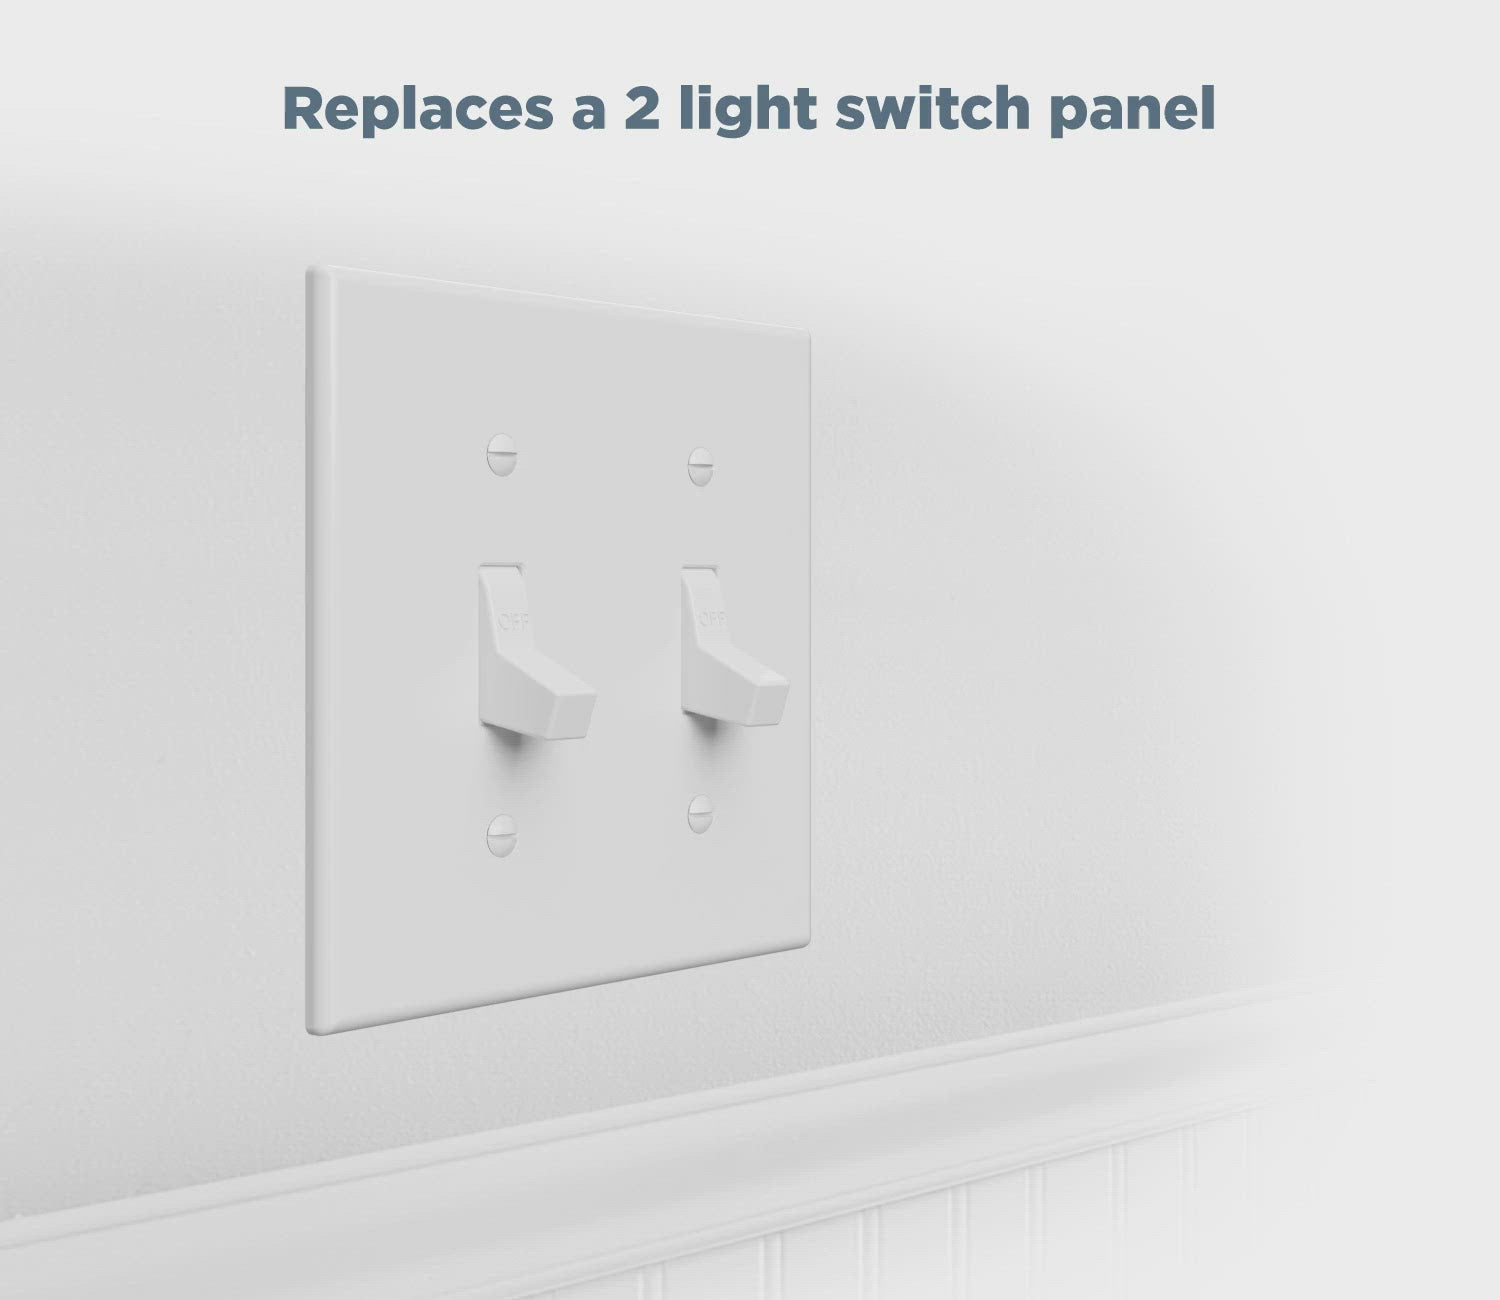 How to replace a standard light switch to All-in-One Smart Home Control with Two Switches - Video